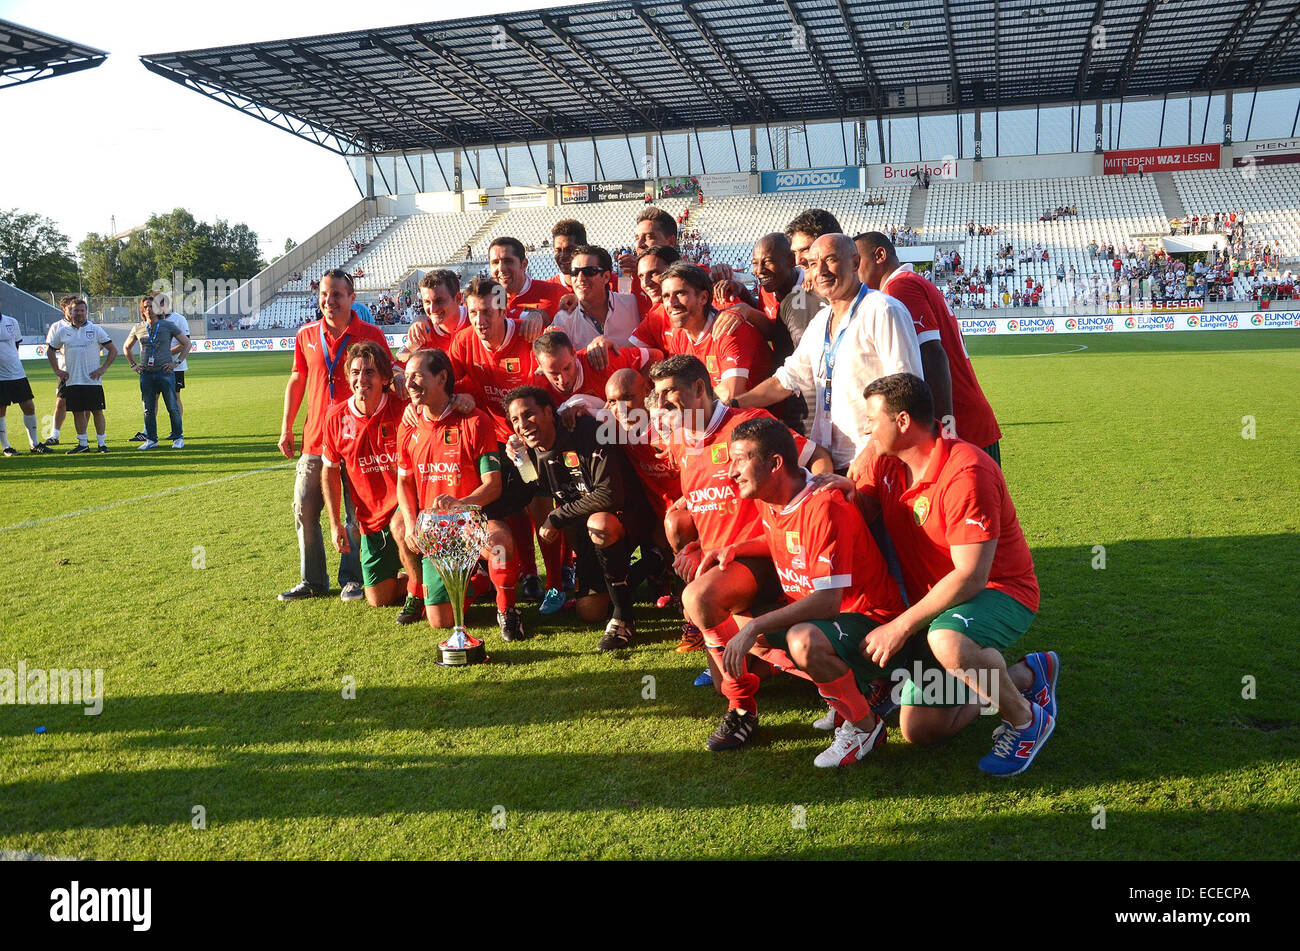 Retired football stars from Germany and Portugal playing a charity match.  Featuring: Adelino Barros,Paulo Madeira,Rui Bento,Pedro Mendes,Fernando Meira,Petit,Sa Pinto,Rui Barros,Fernando Gomes,Paulo Futre,Antonia Folha,Paulo Santos,Dimas Teixeira,Pacheco Stock Photo